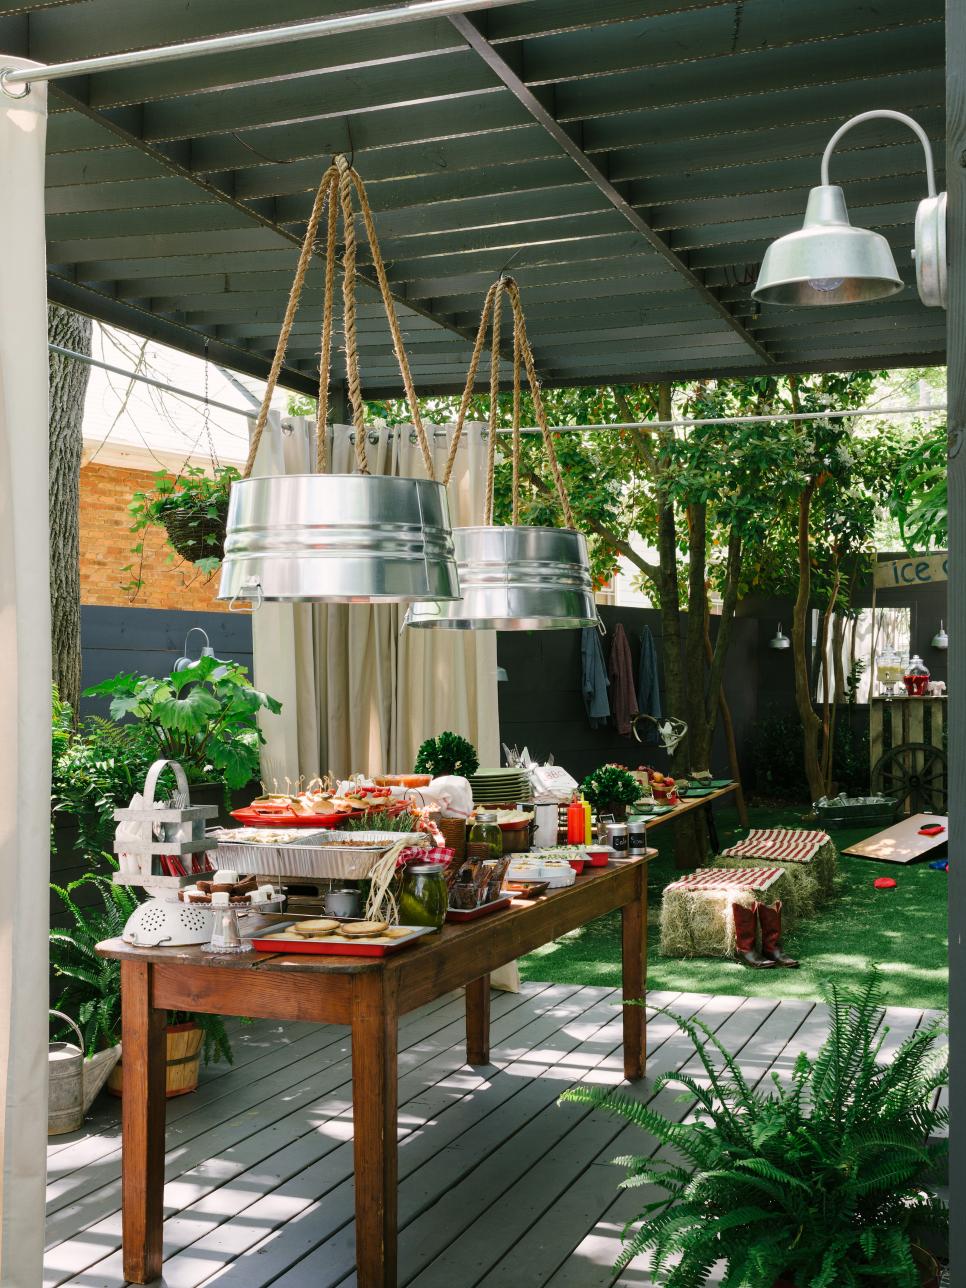 How To Host A Backyard Barbecue Wedding Shower DIY